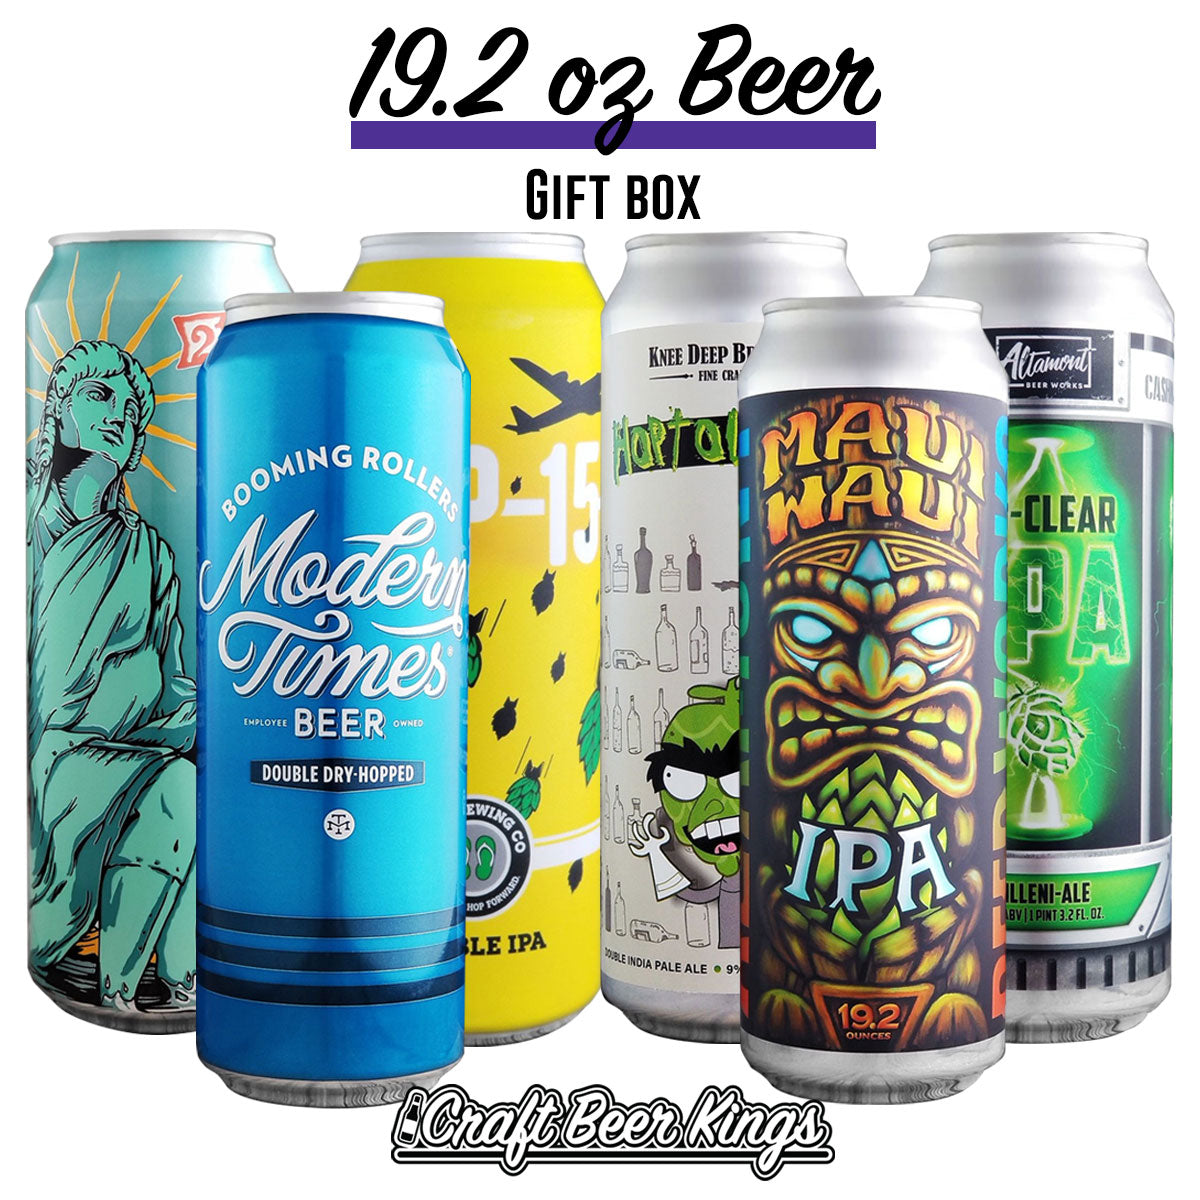 19.2 oz Beer Gift Box - Shipping Included!